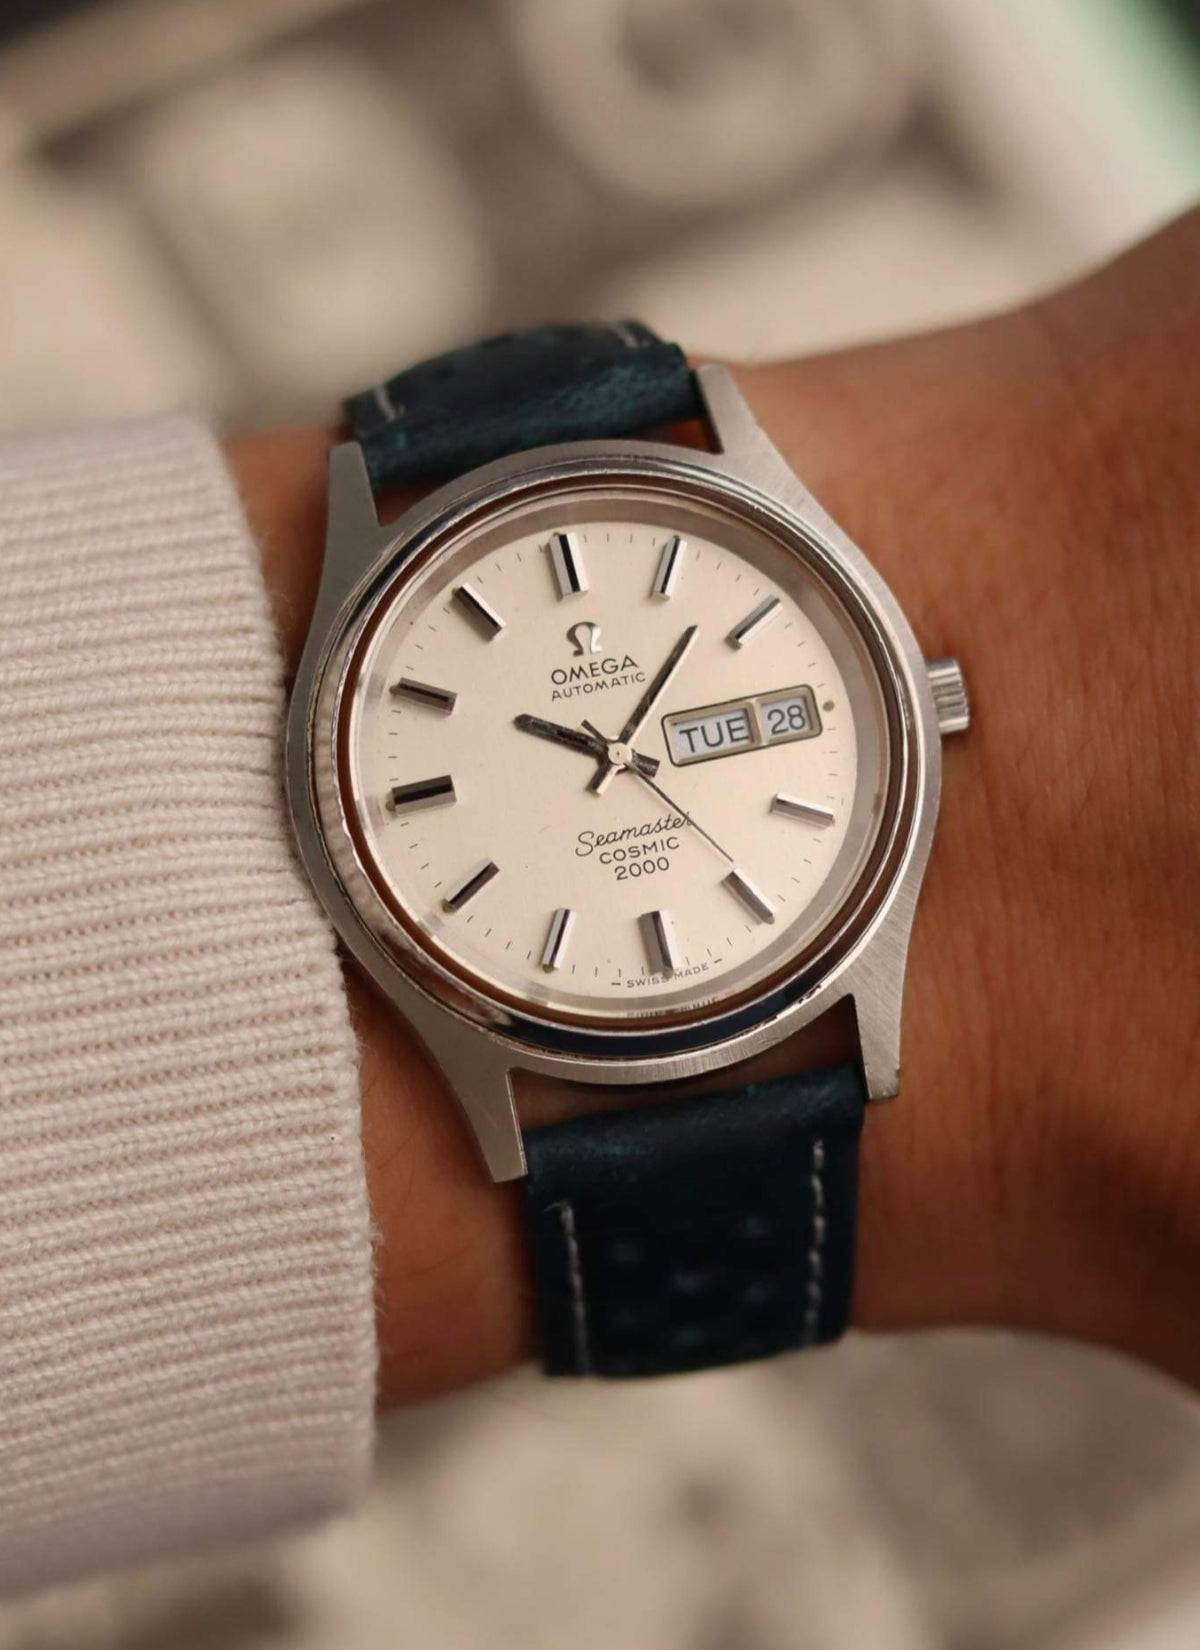 Omega Seamaster Cosmic 2000 Day-Date 166.0129